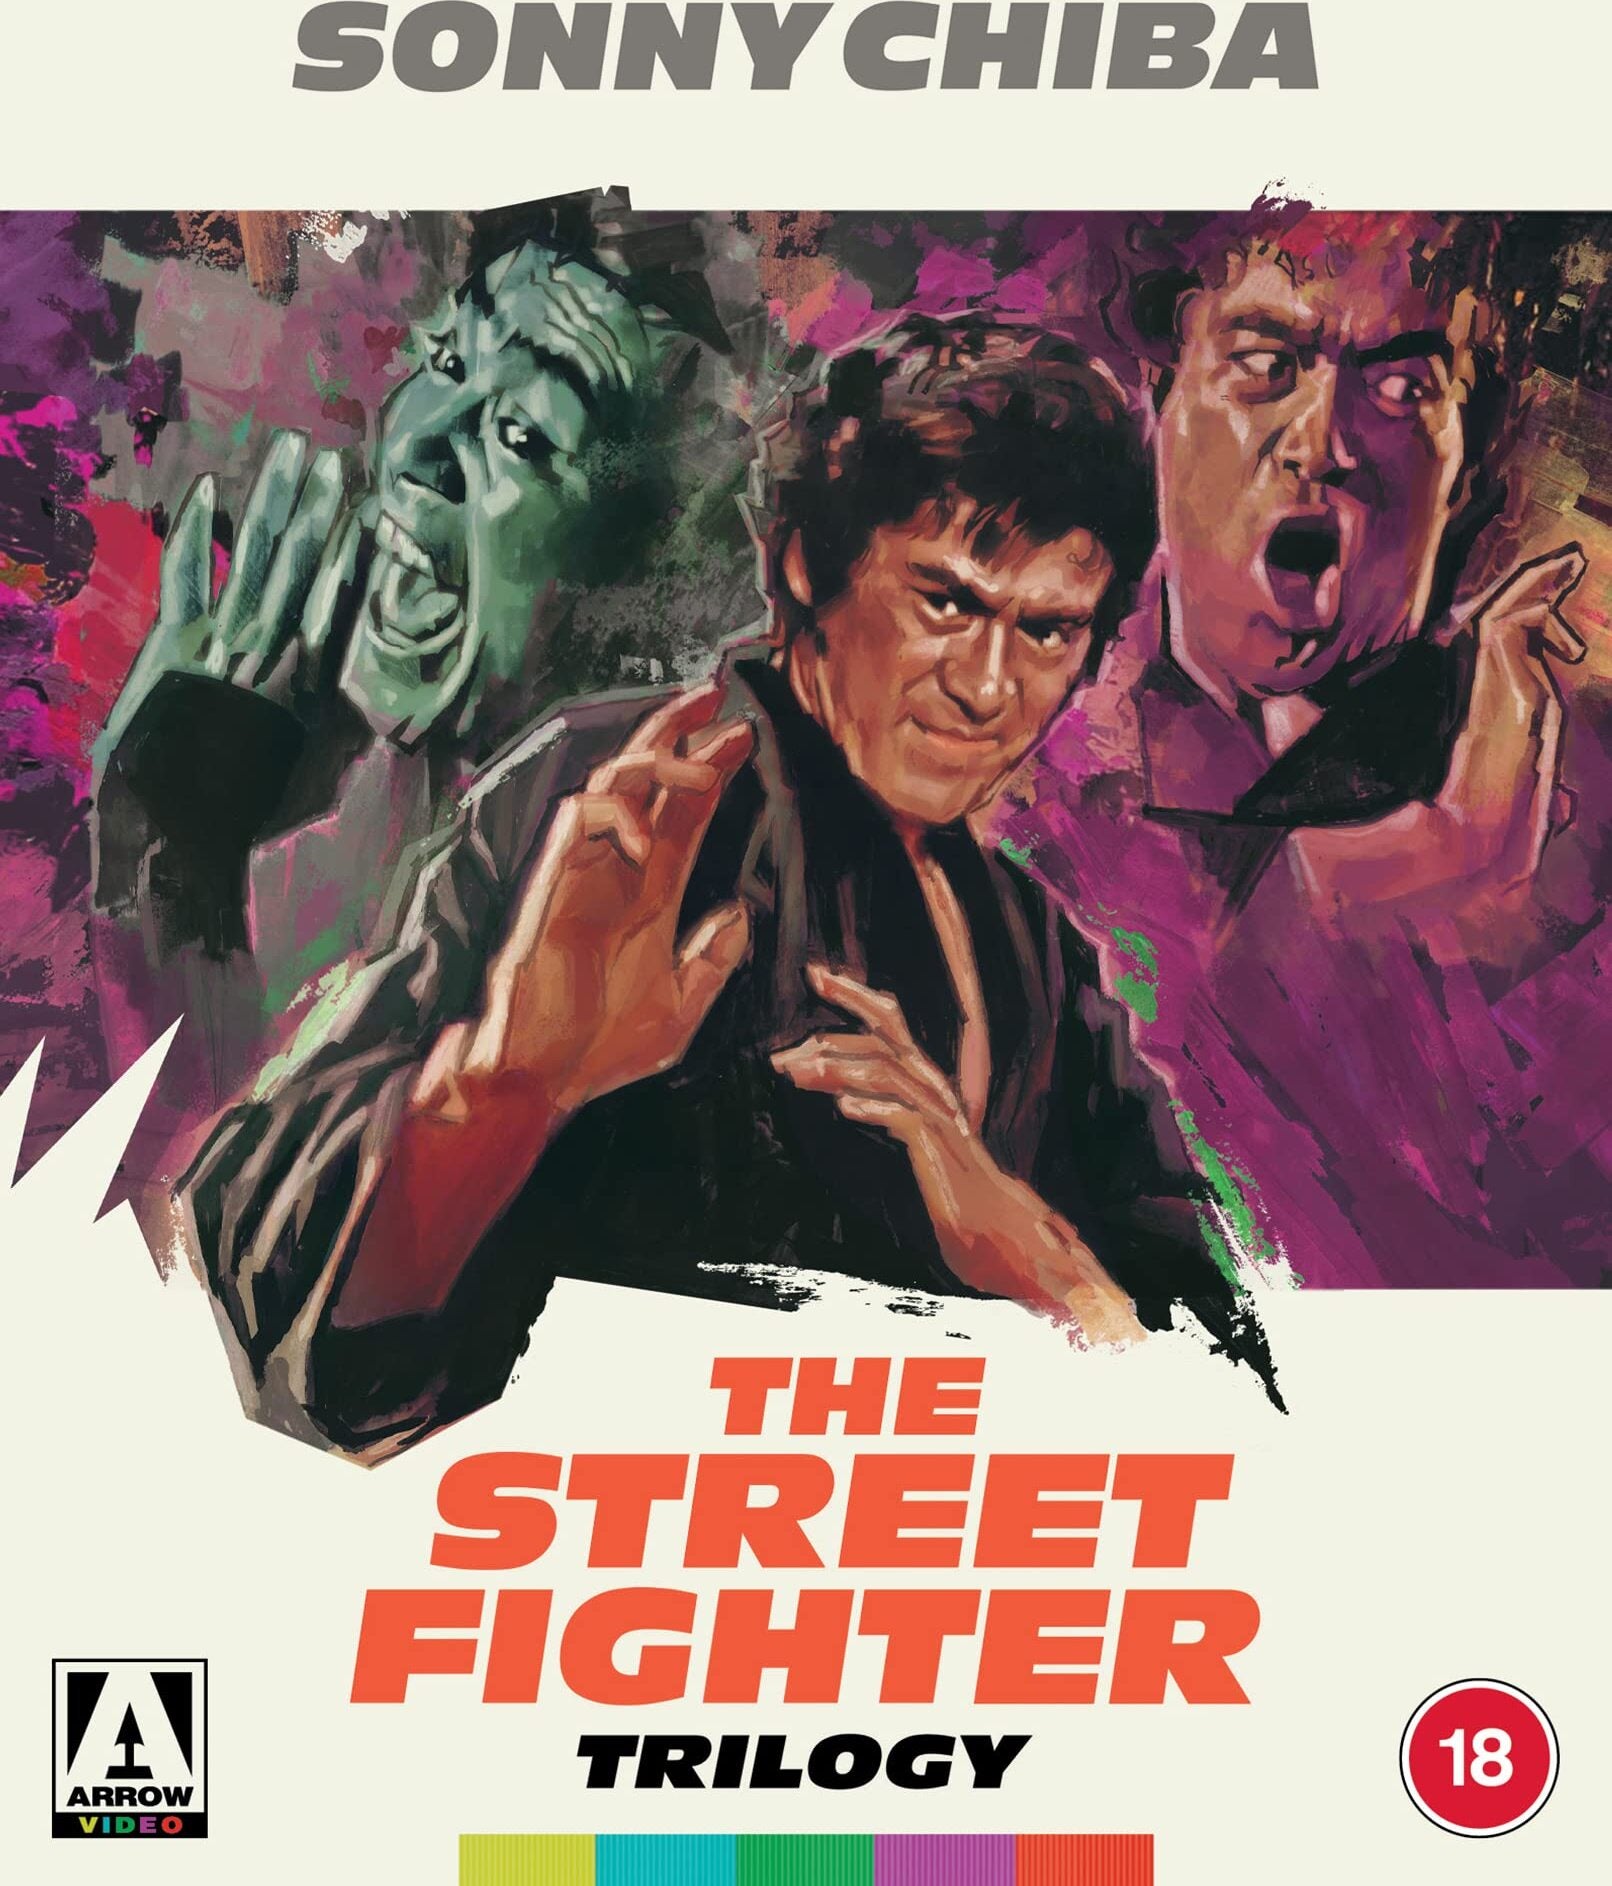 A New 'Street Fighter' Movie Is Being Developed